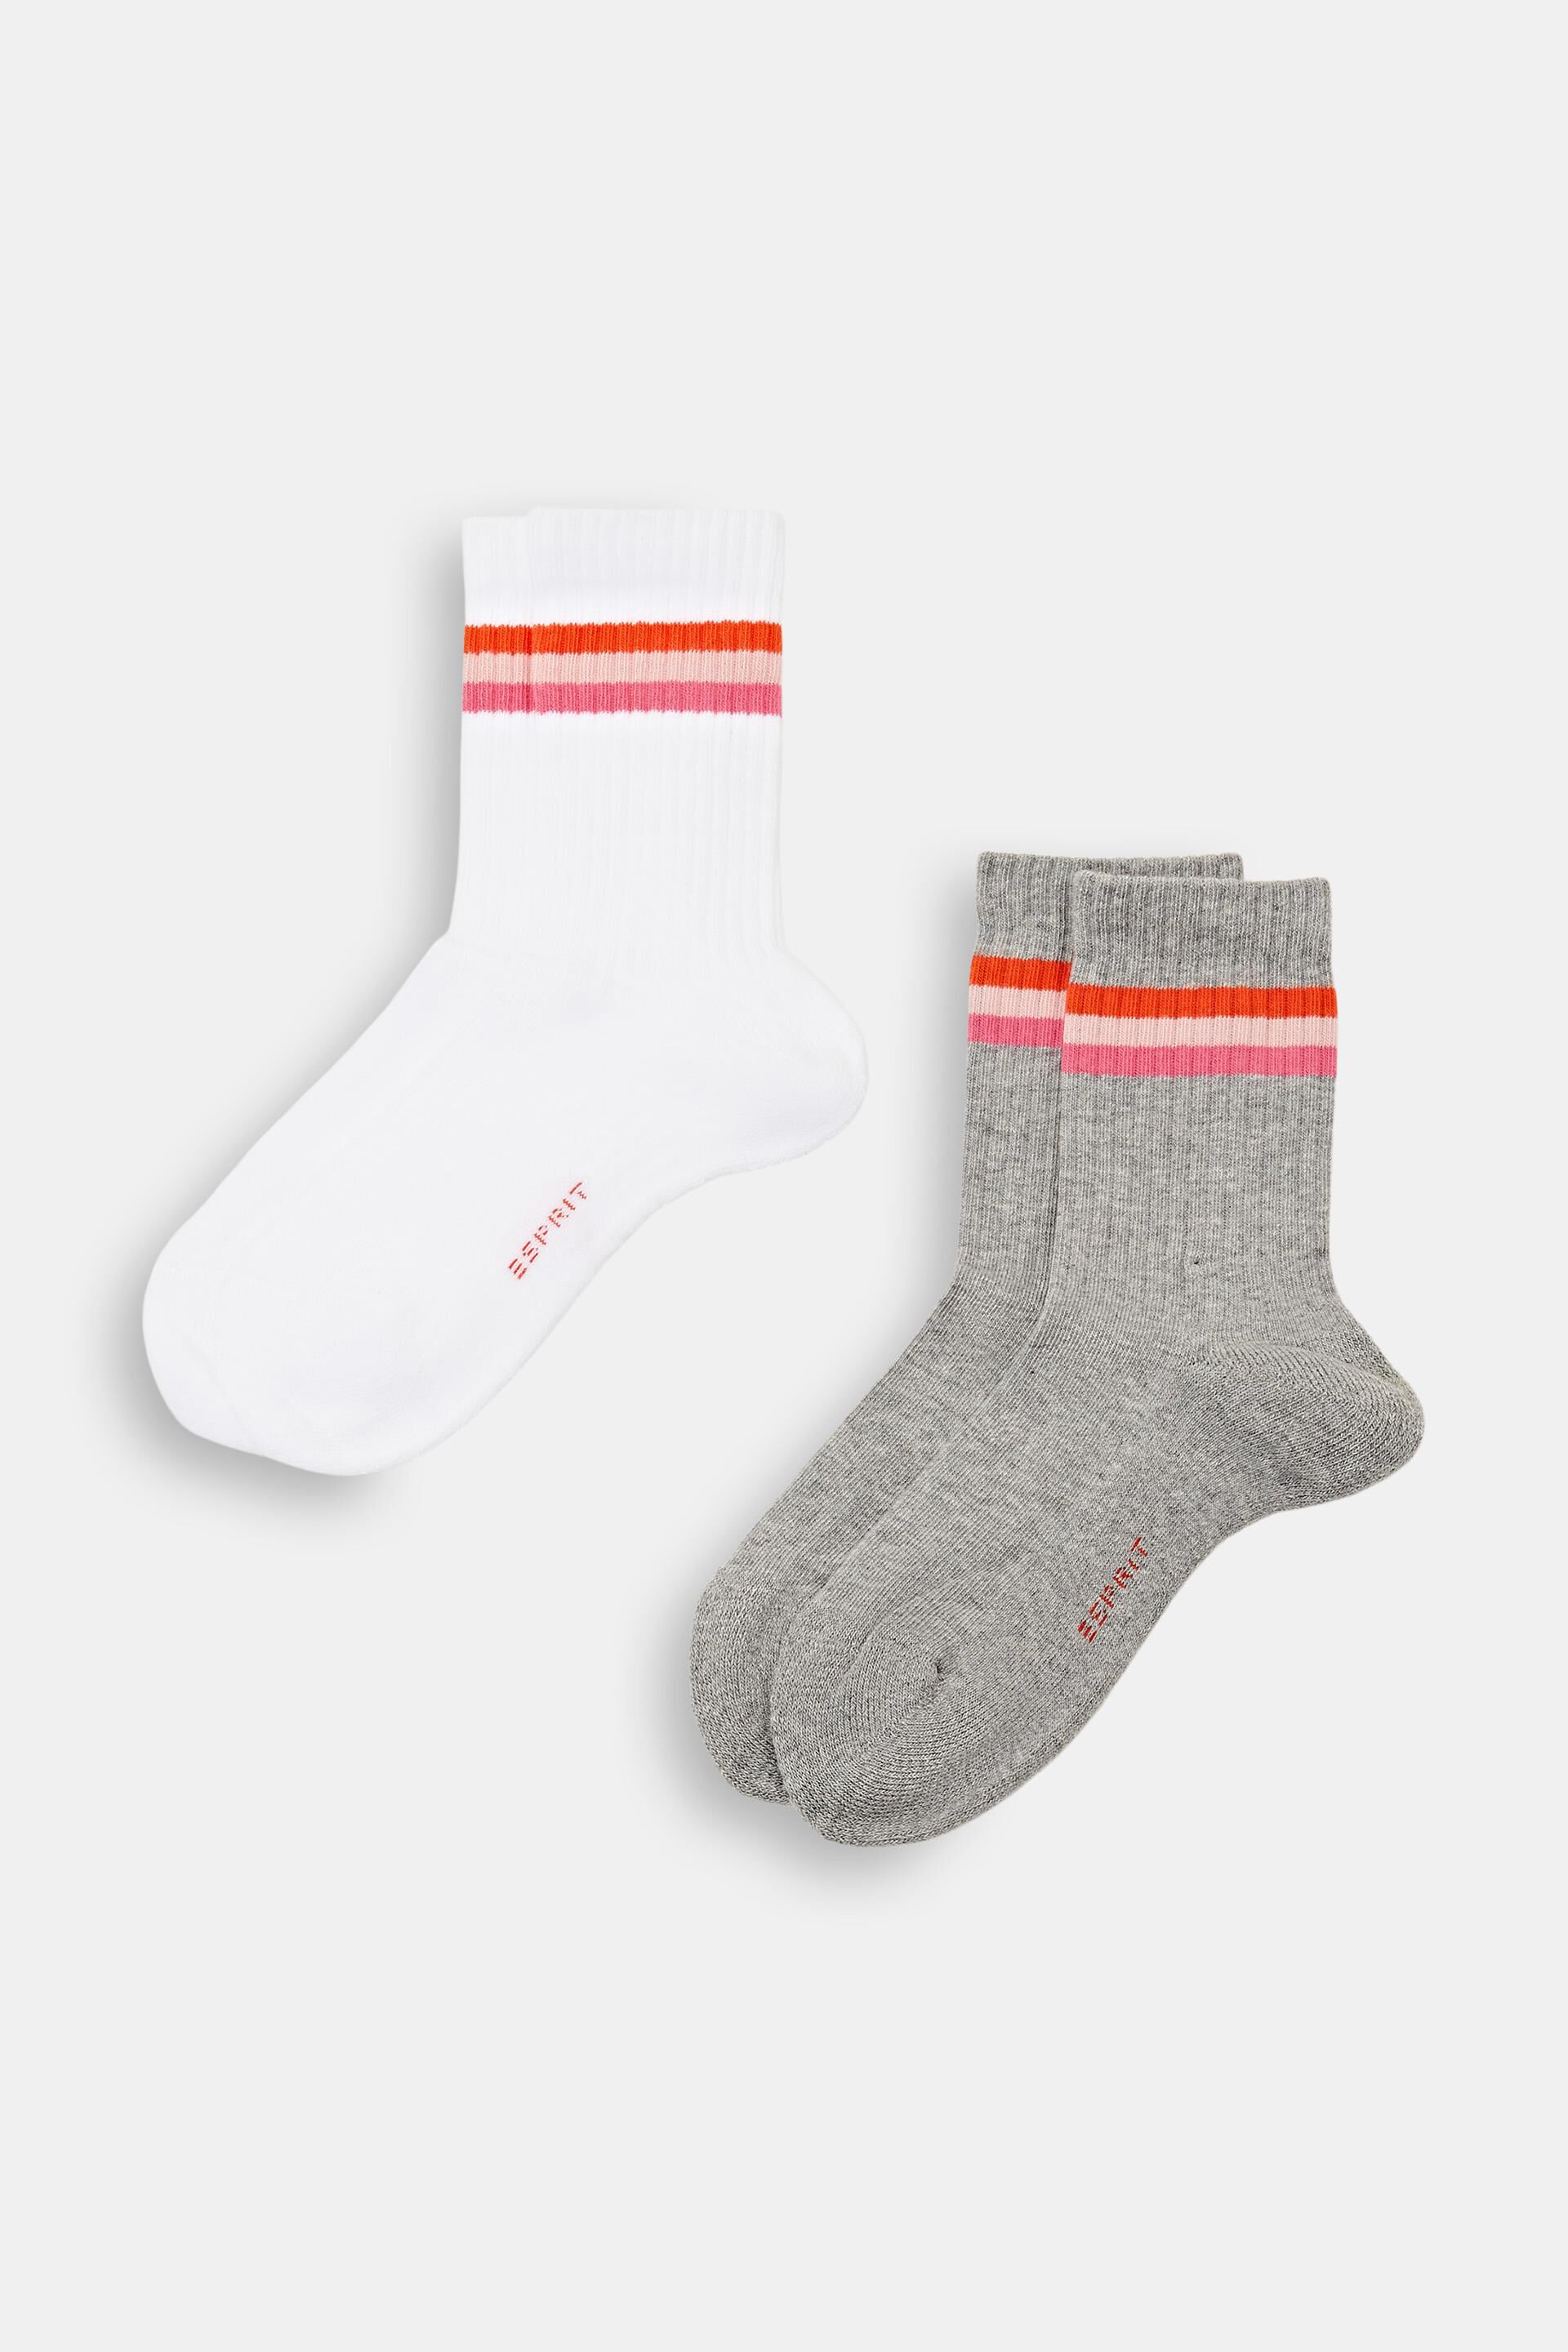 Esprit stripes 2-pack ribbed with socks of